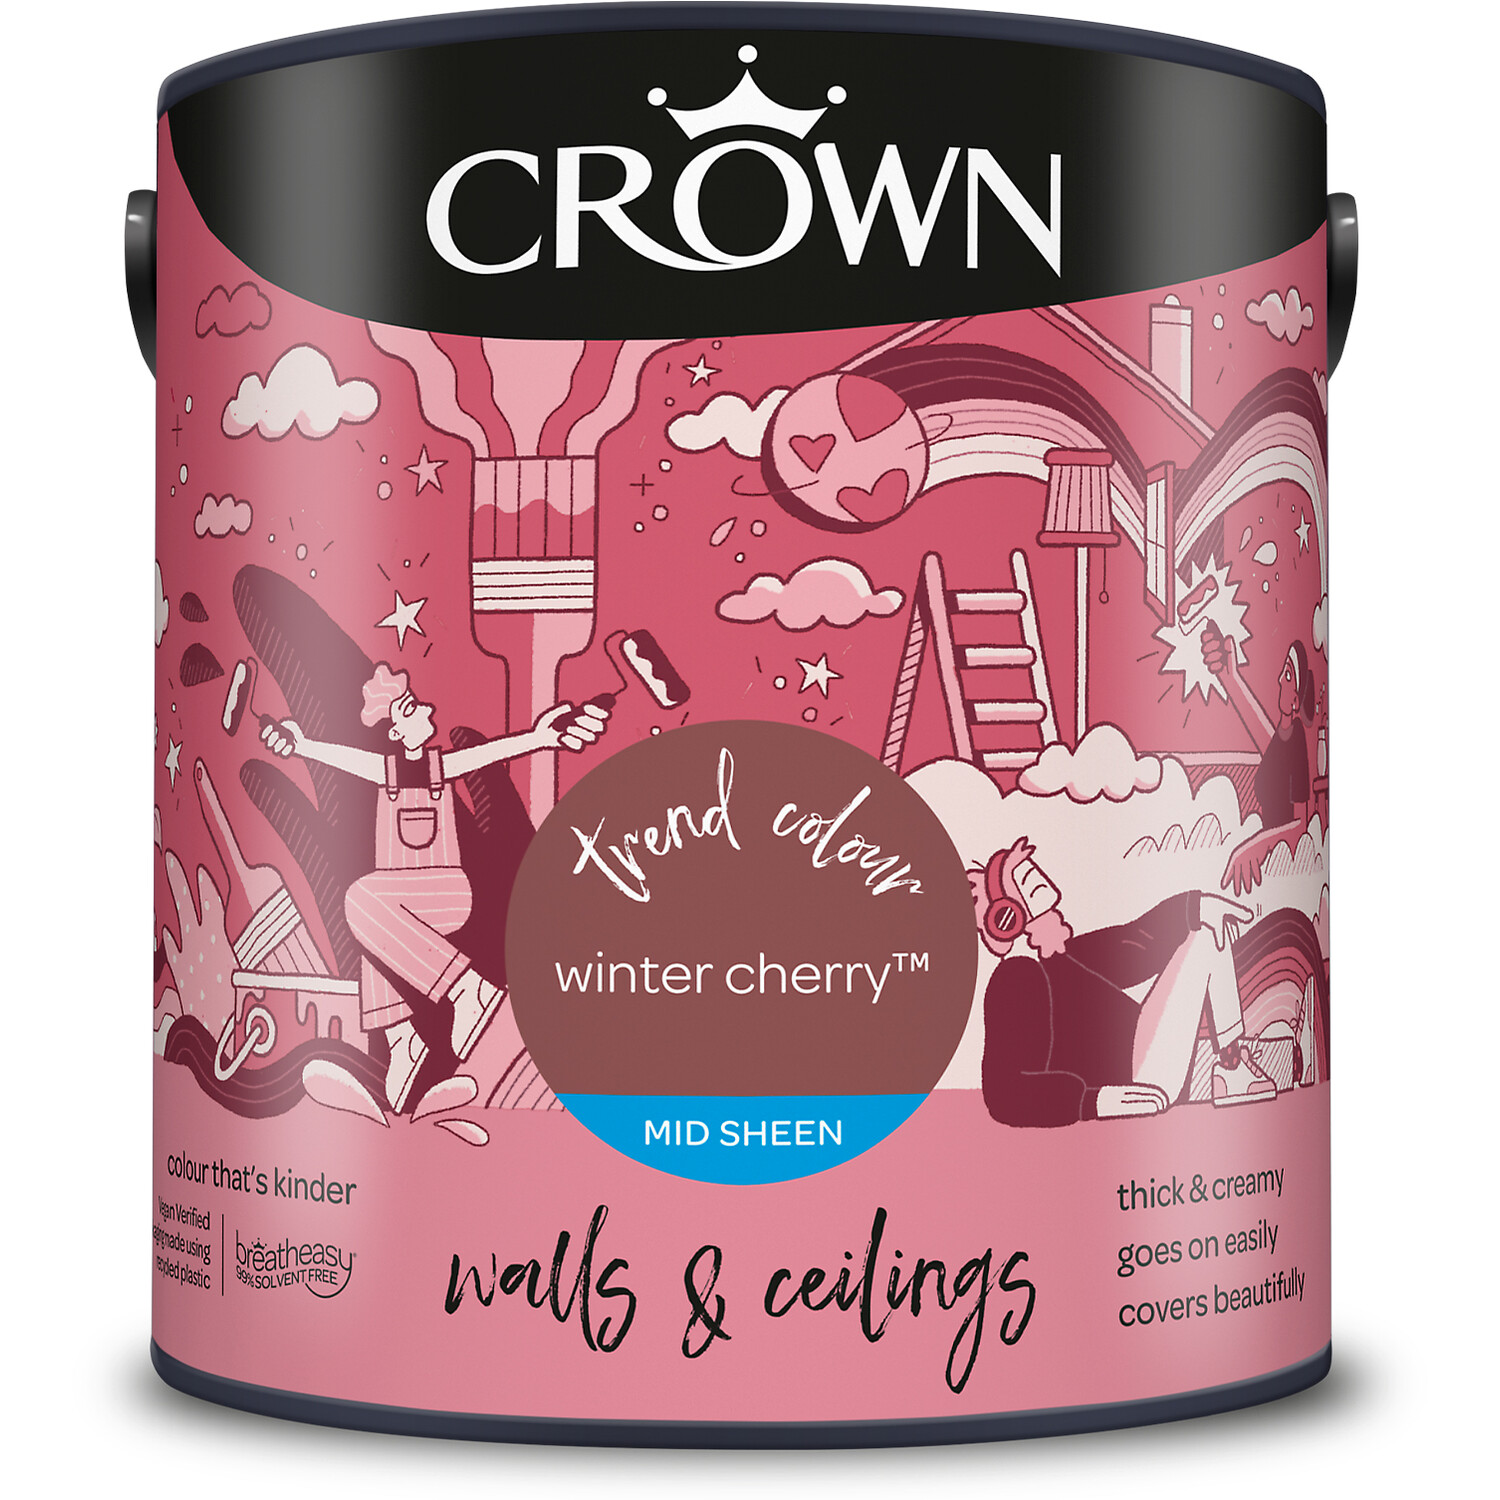 Crown Walls & Ceilings Winter Cherry Mid Sheen Emulsion Paint 2.5L Image 2